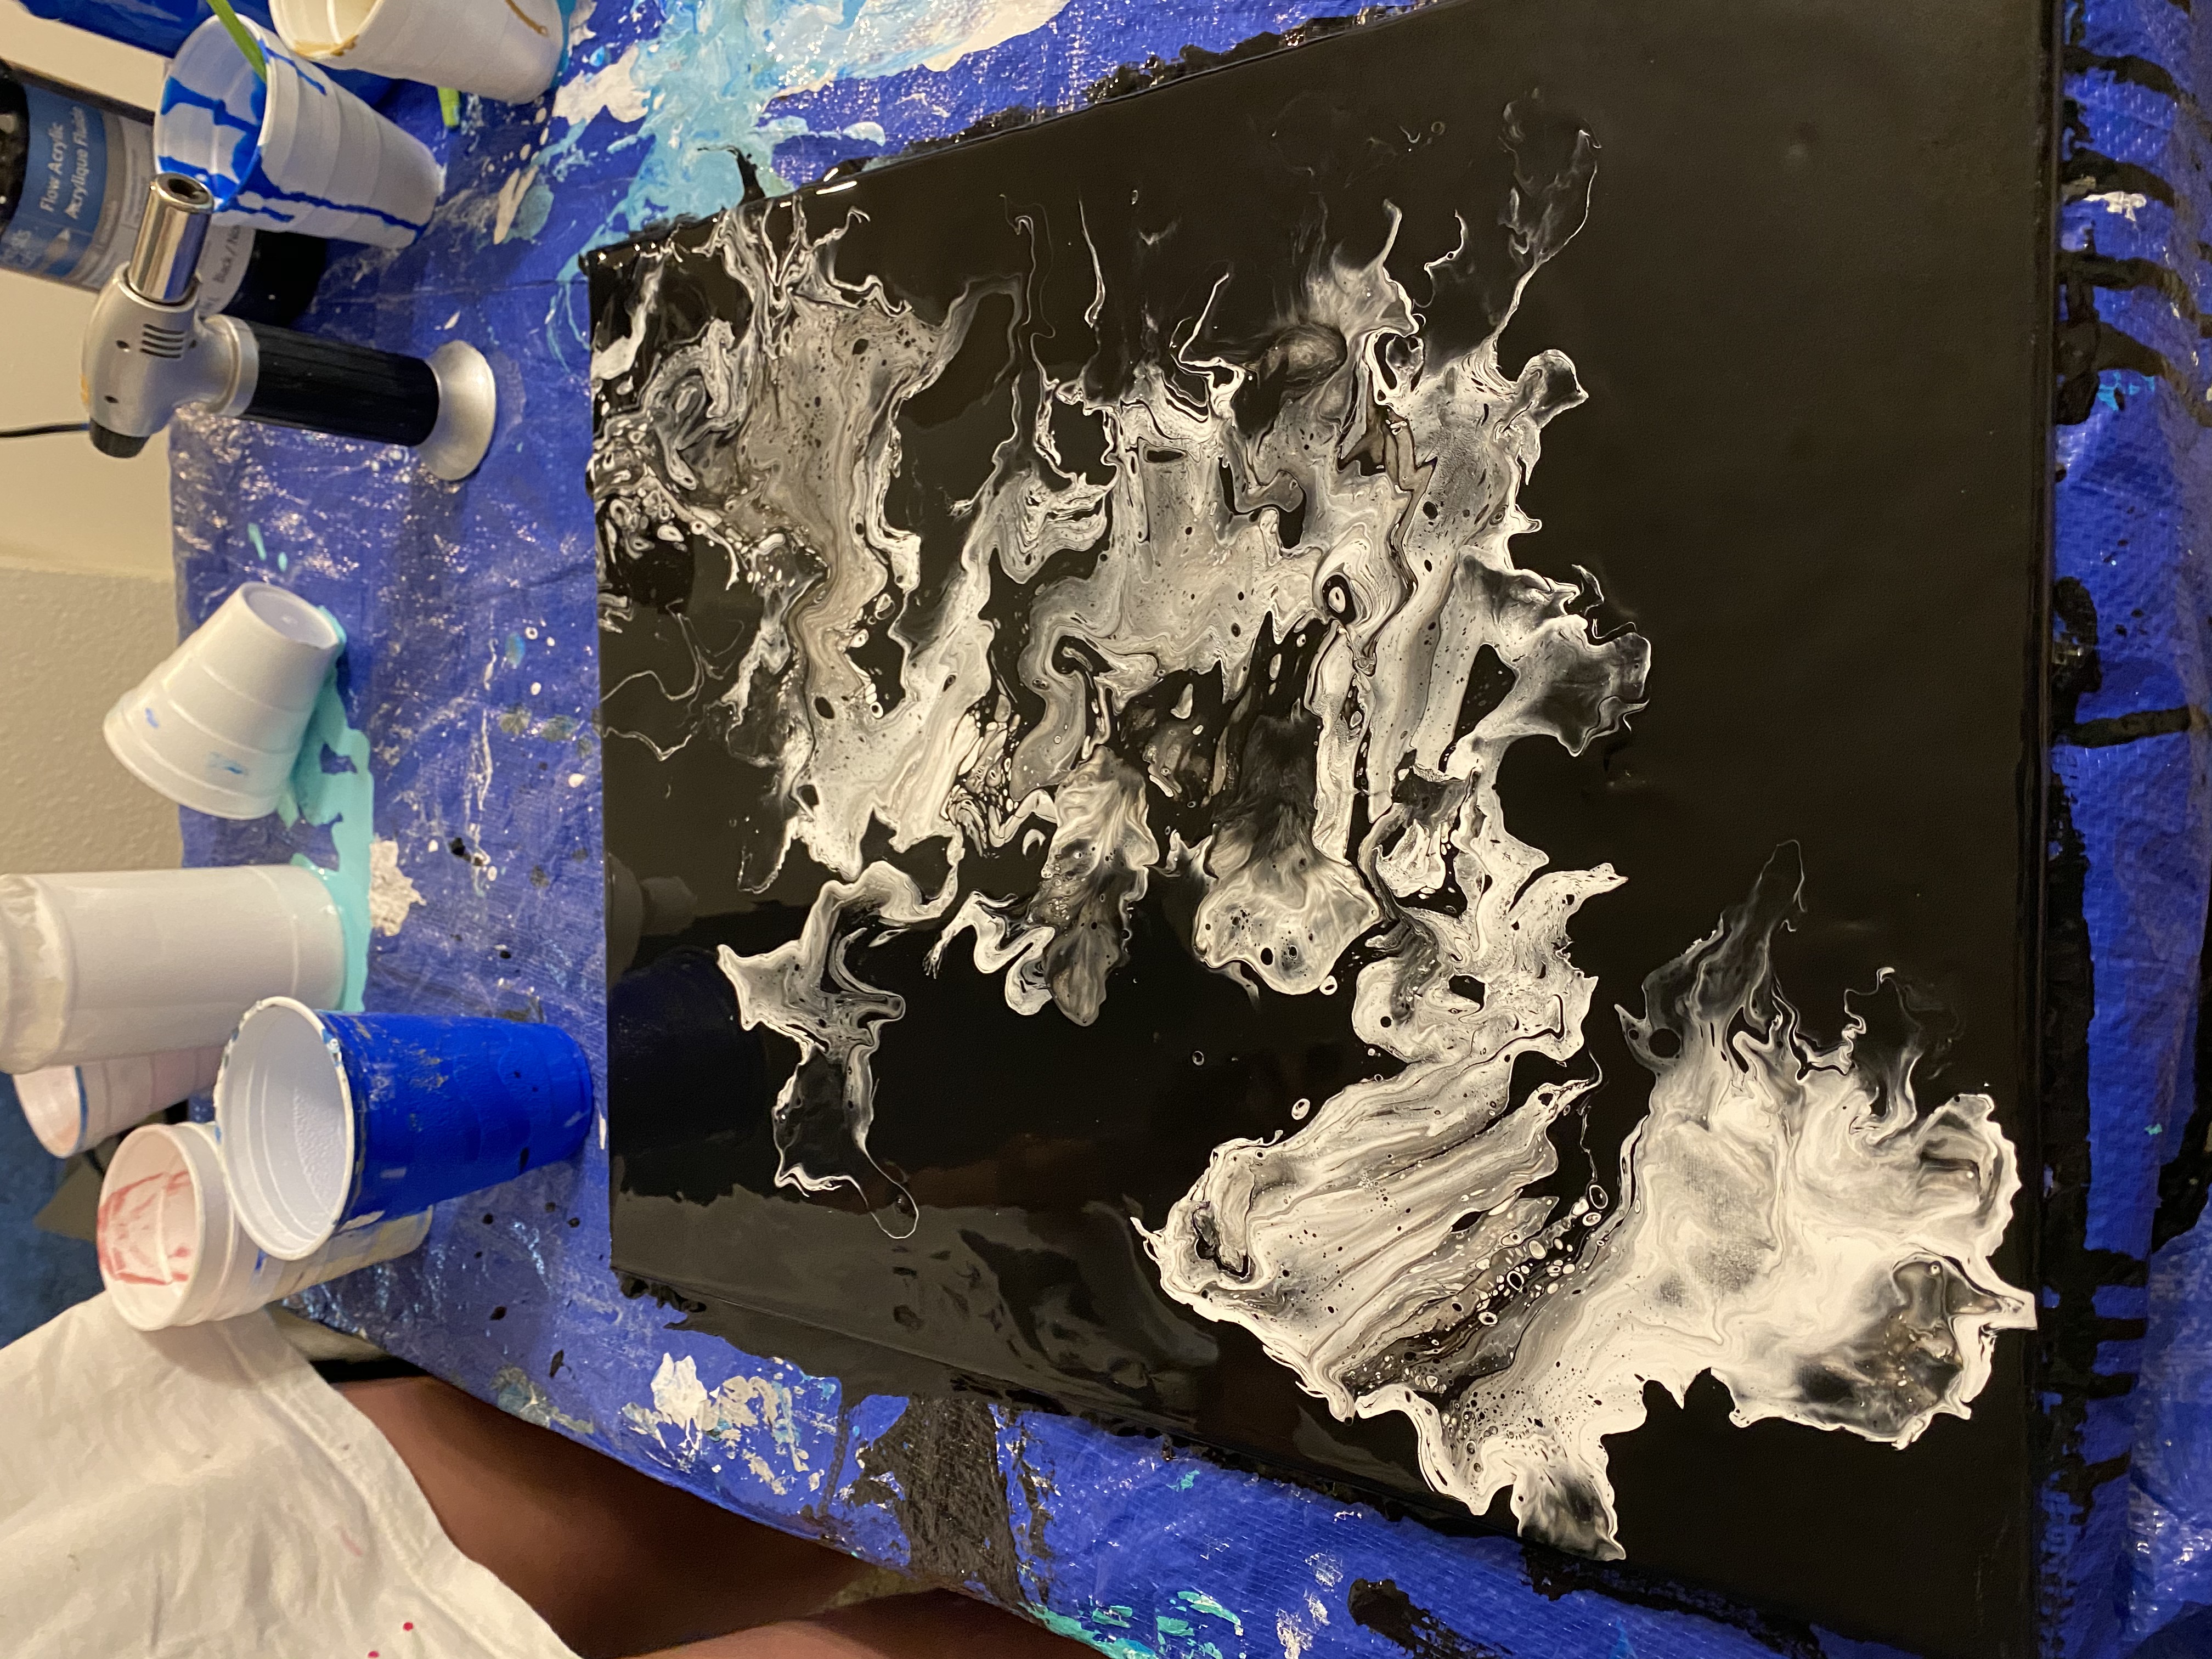 Abstract Acrylic Fluid Paintings For Your Home!